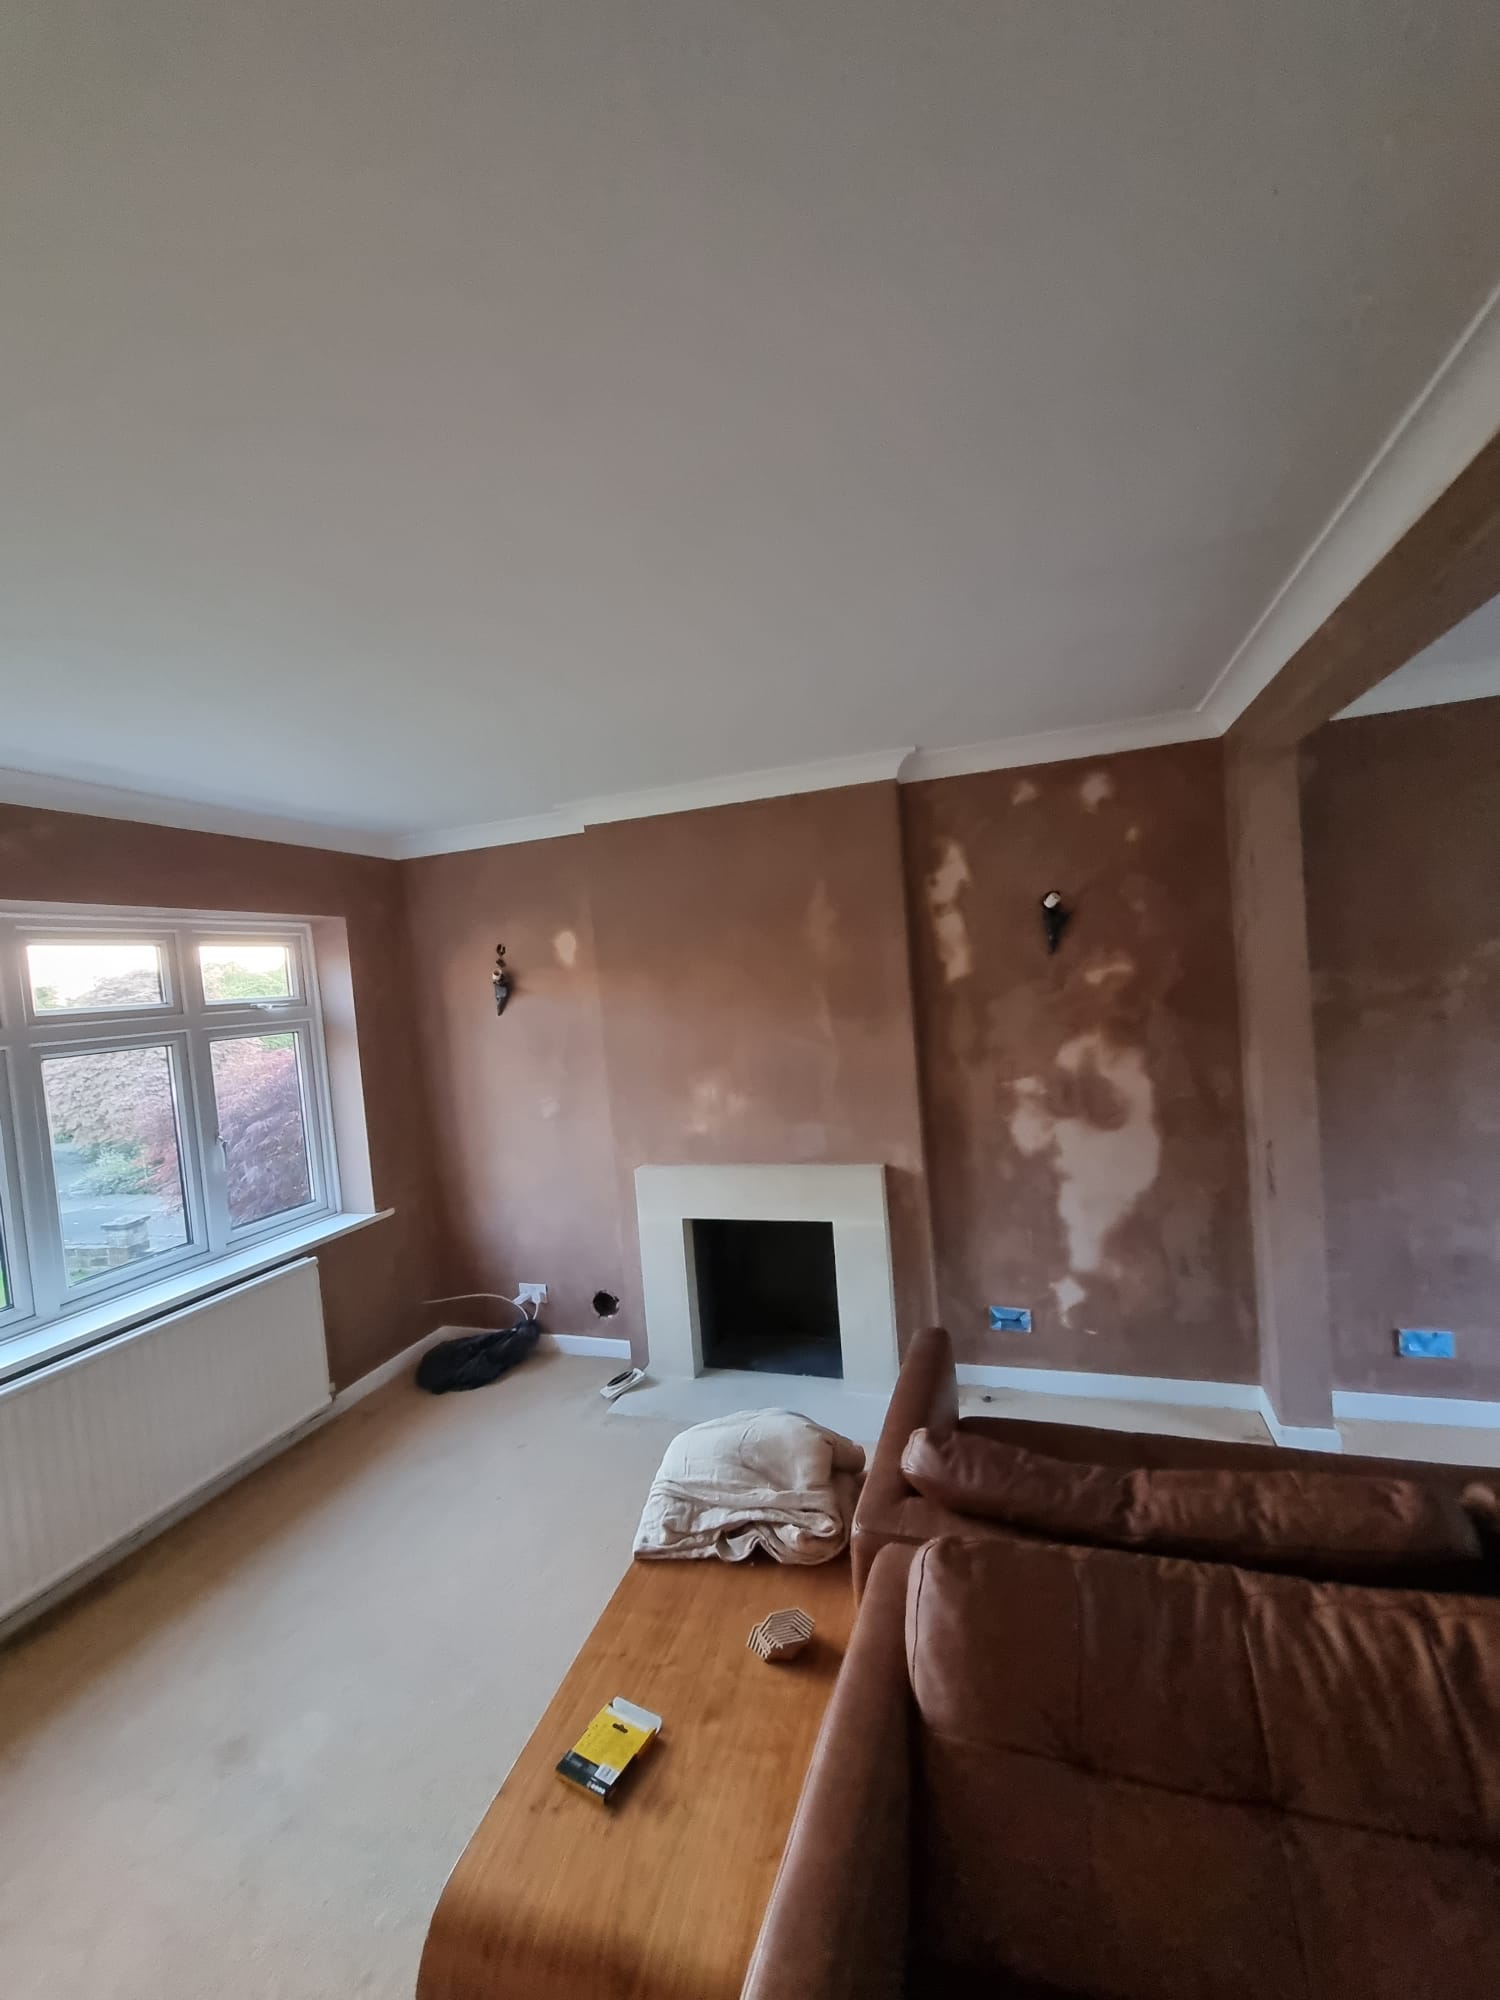 Plastering Contractor Services in London